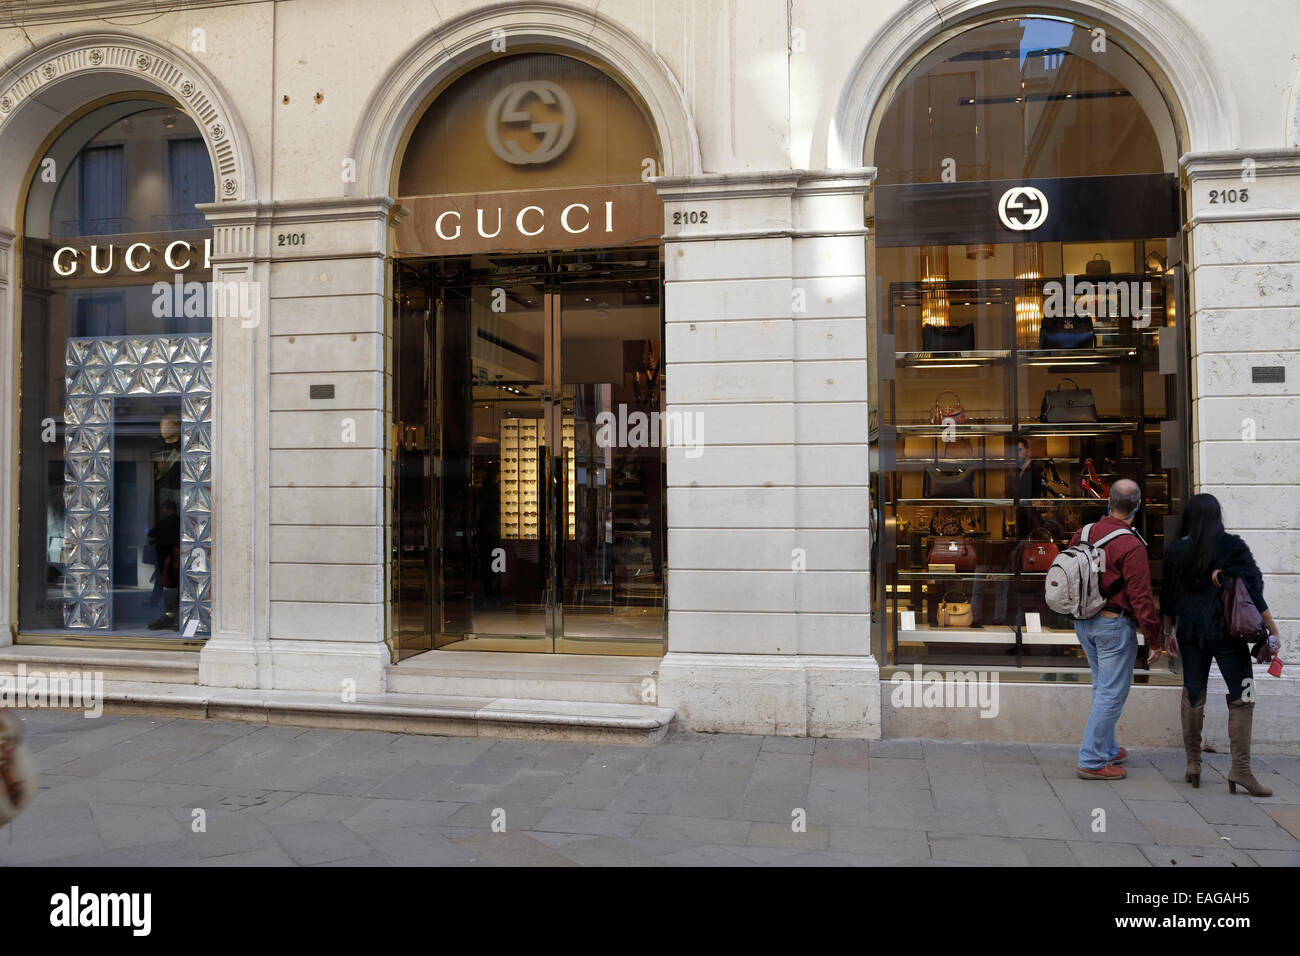 The Gucci store in Venice, Italy Stock Photo, Royalty Free Image: 75347585 - Alamy